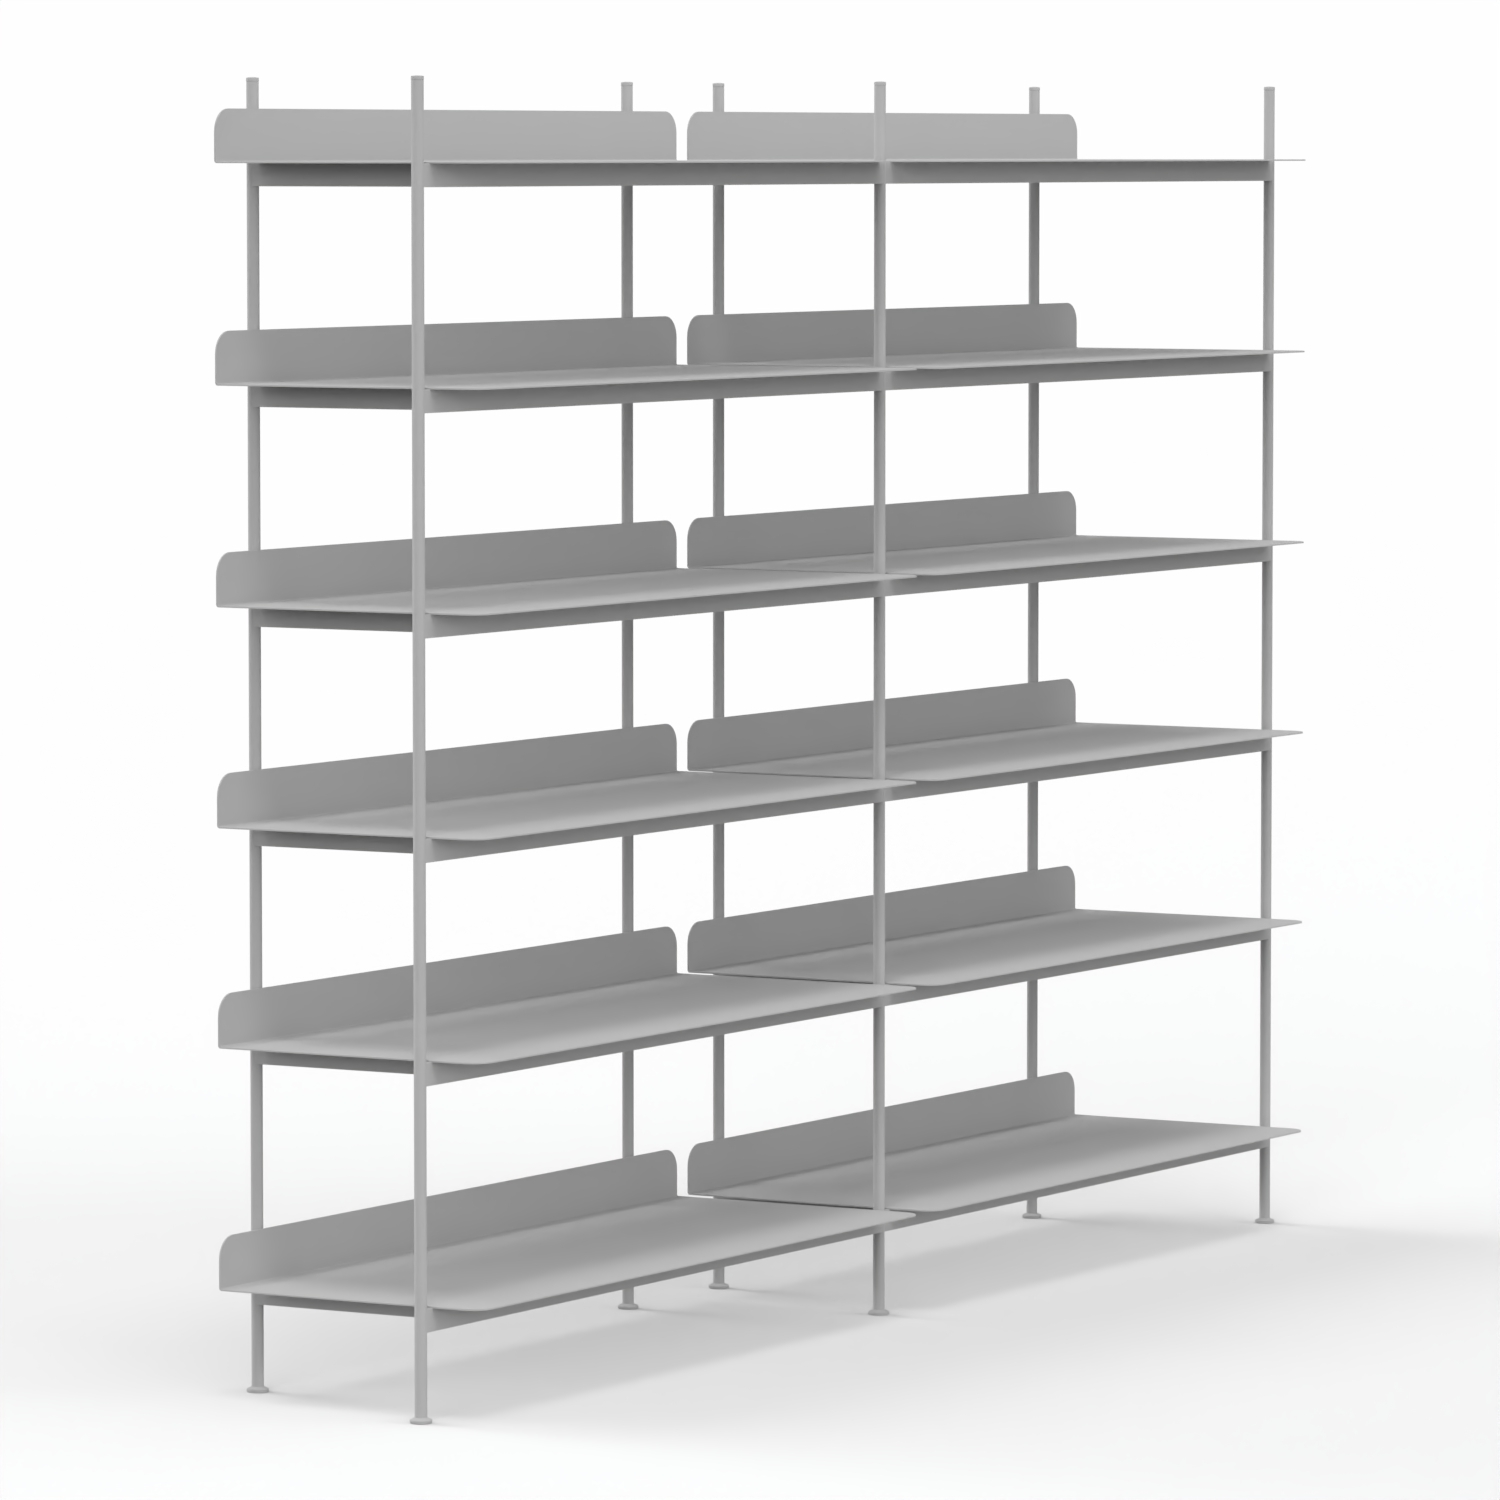 Compile Shelving System / Configuration 8 50086